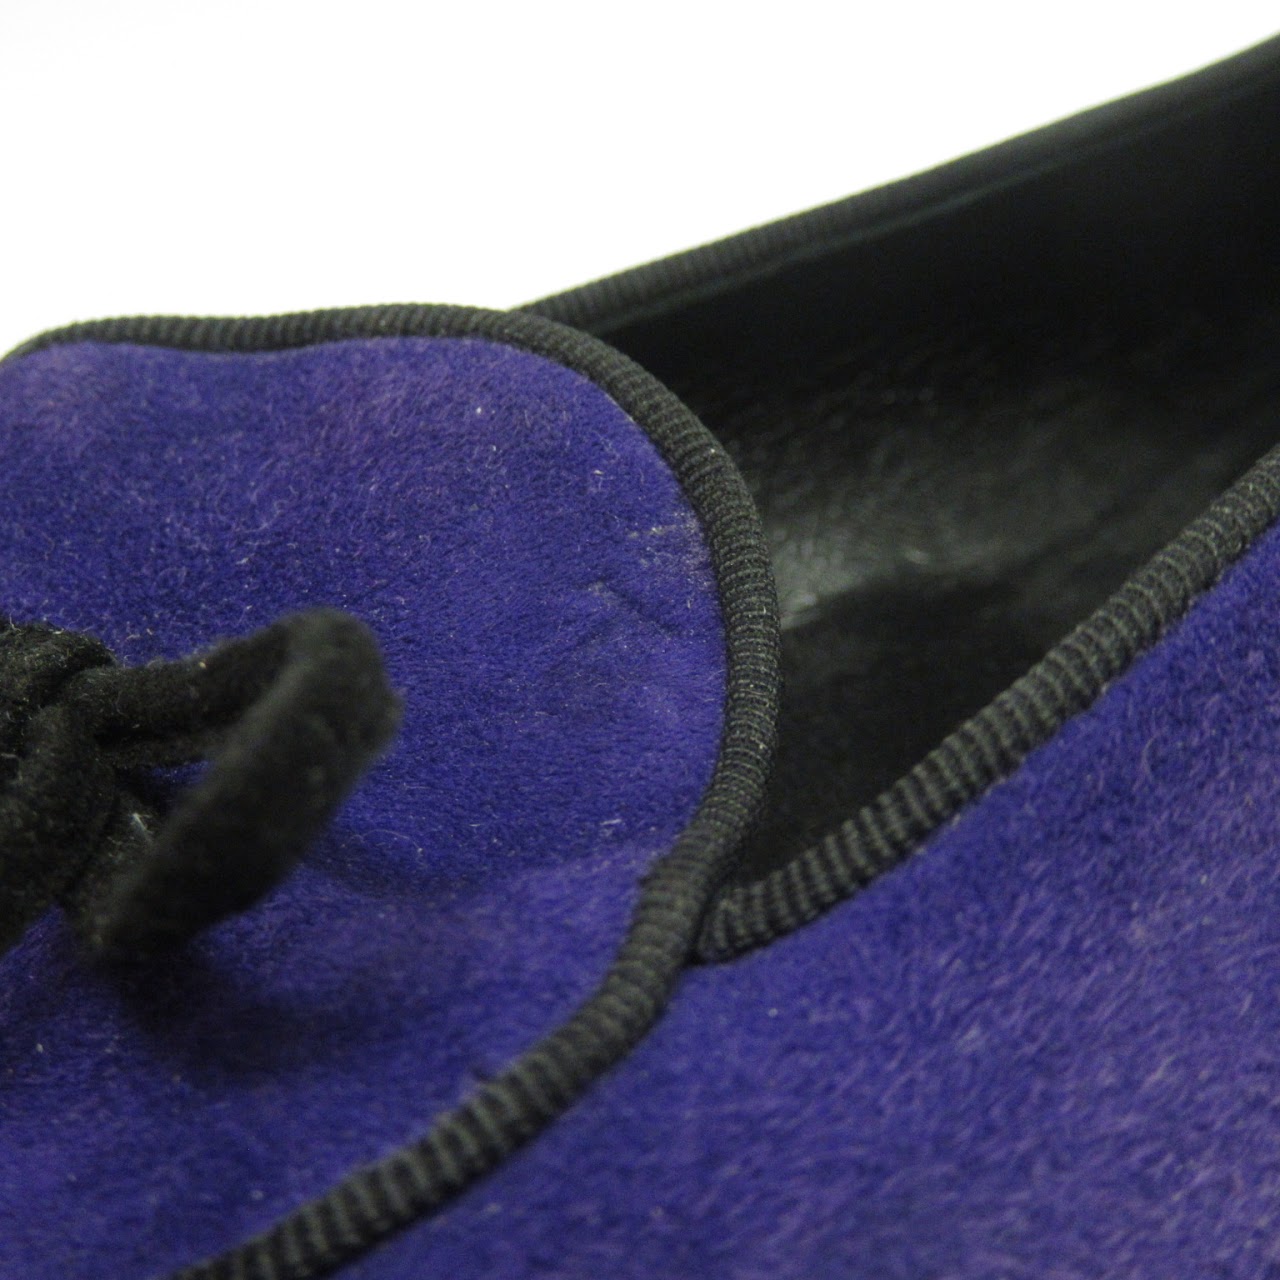 Tod's Purple Suede Flats